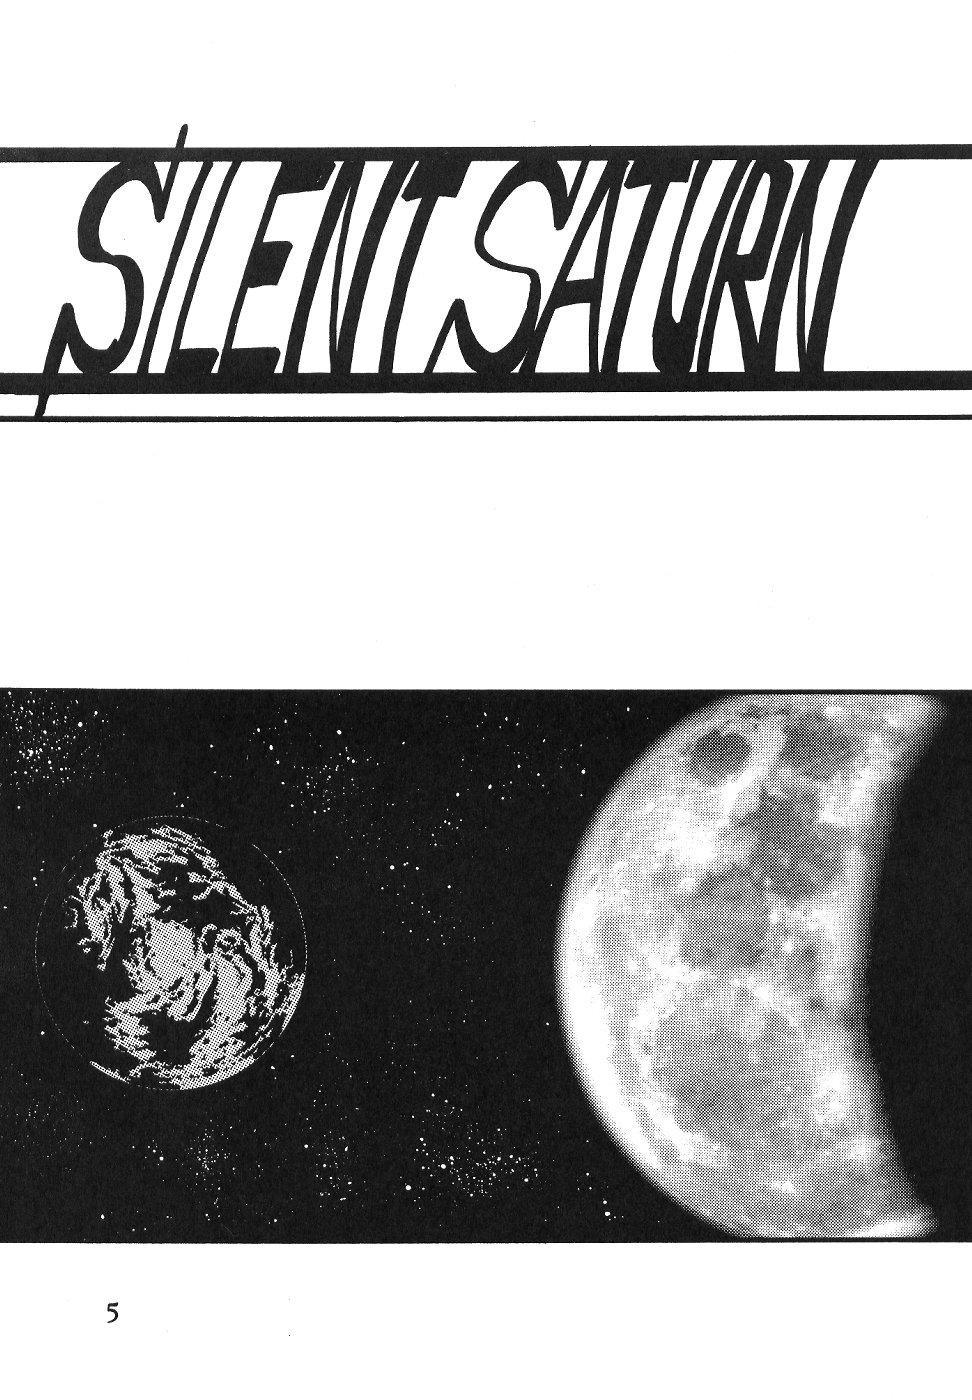 Cousin Silent Saturn SS vol. 1 - Sailor moon Made - Page 5